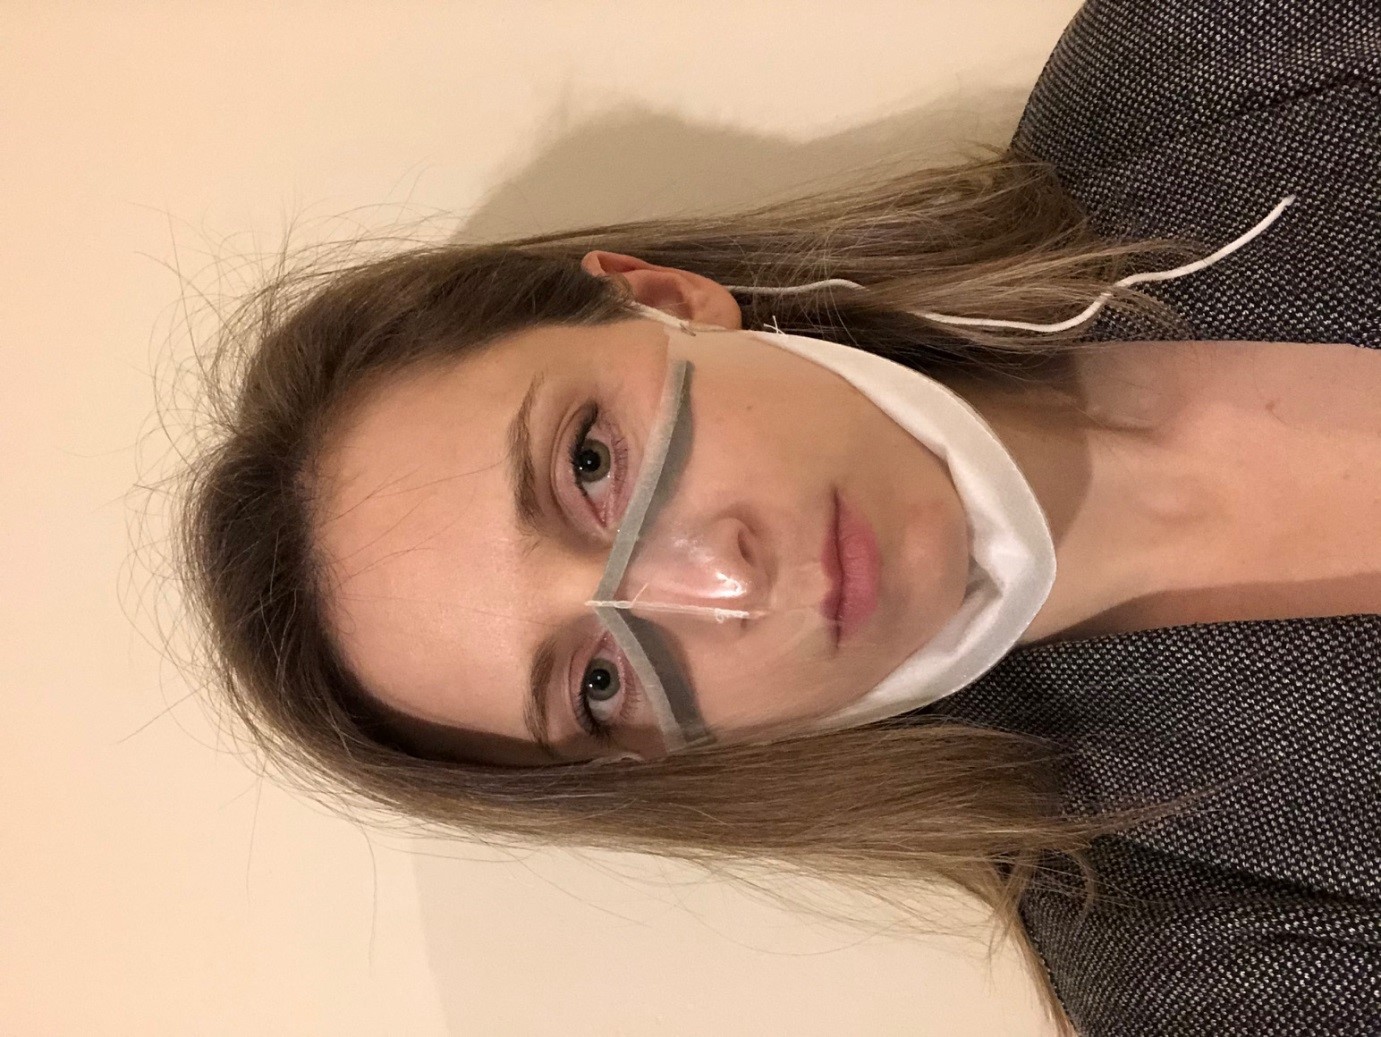 Design and innovation engineer Abi Bush demonstrates the new see-through mask. (Cambridge University Hospitals/ PA)